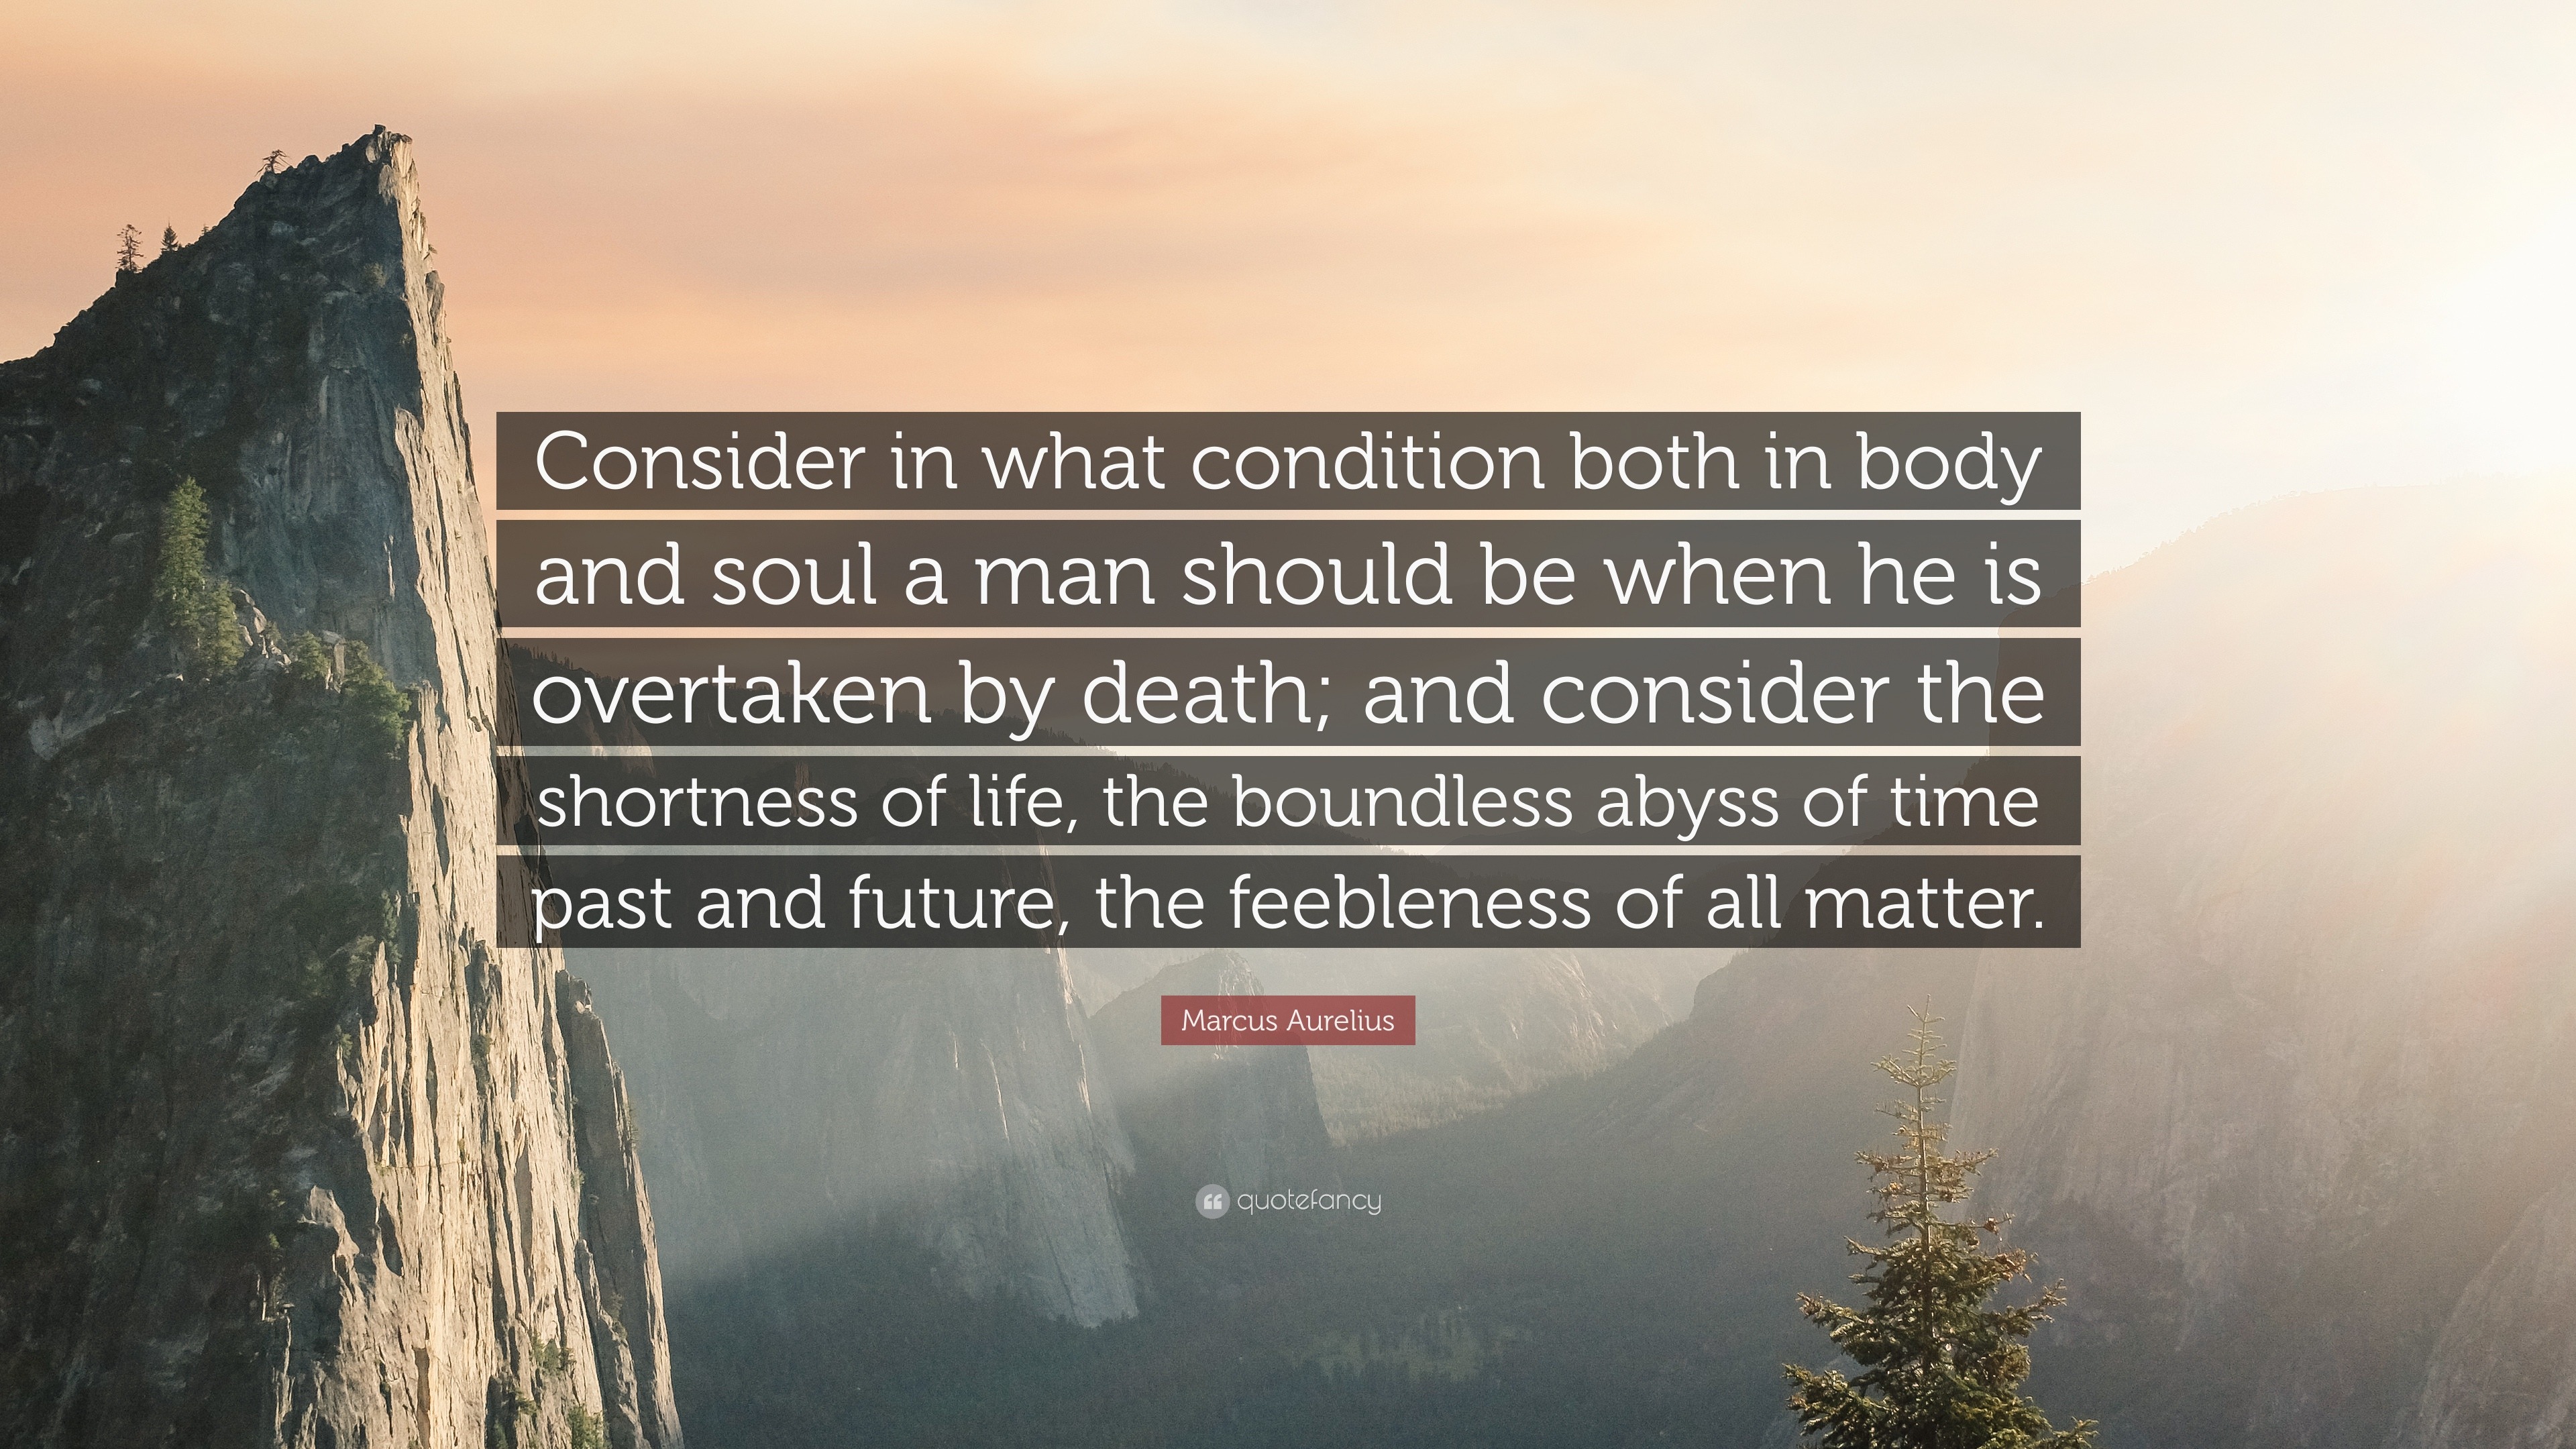 Marcus Aurelius Quote “Consider in what condition both in body and soul a man